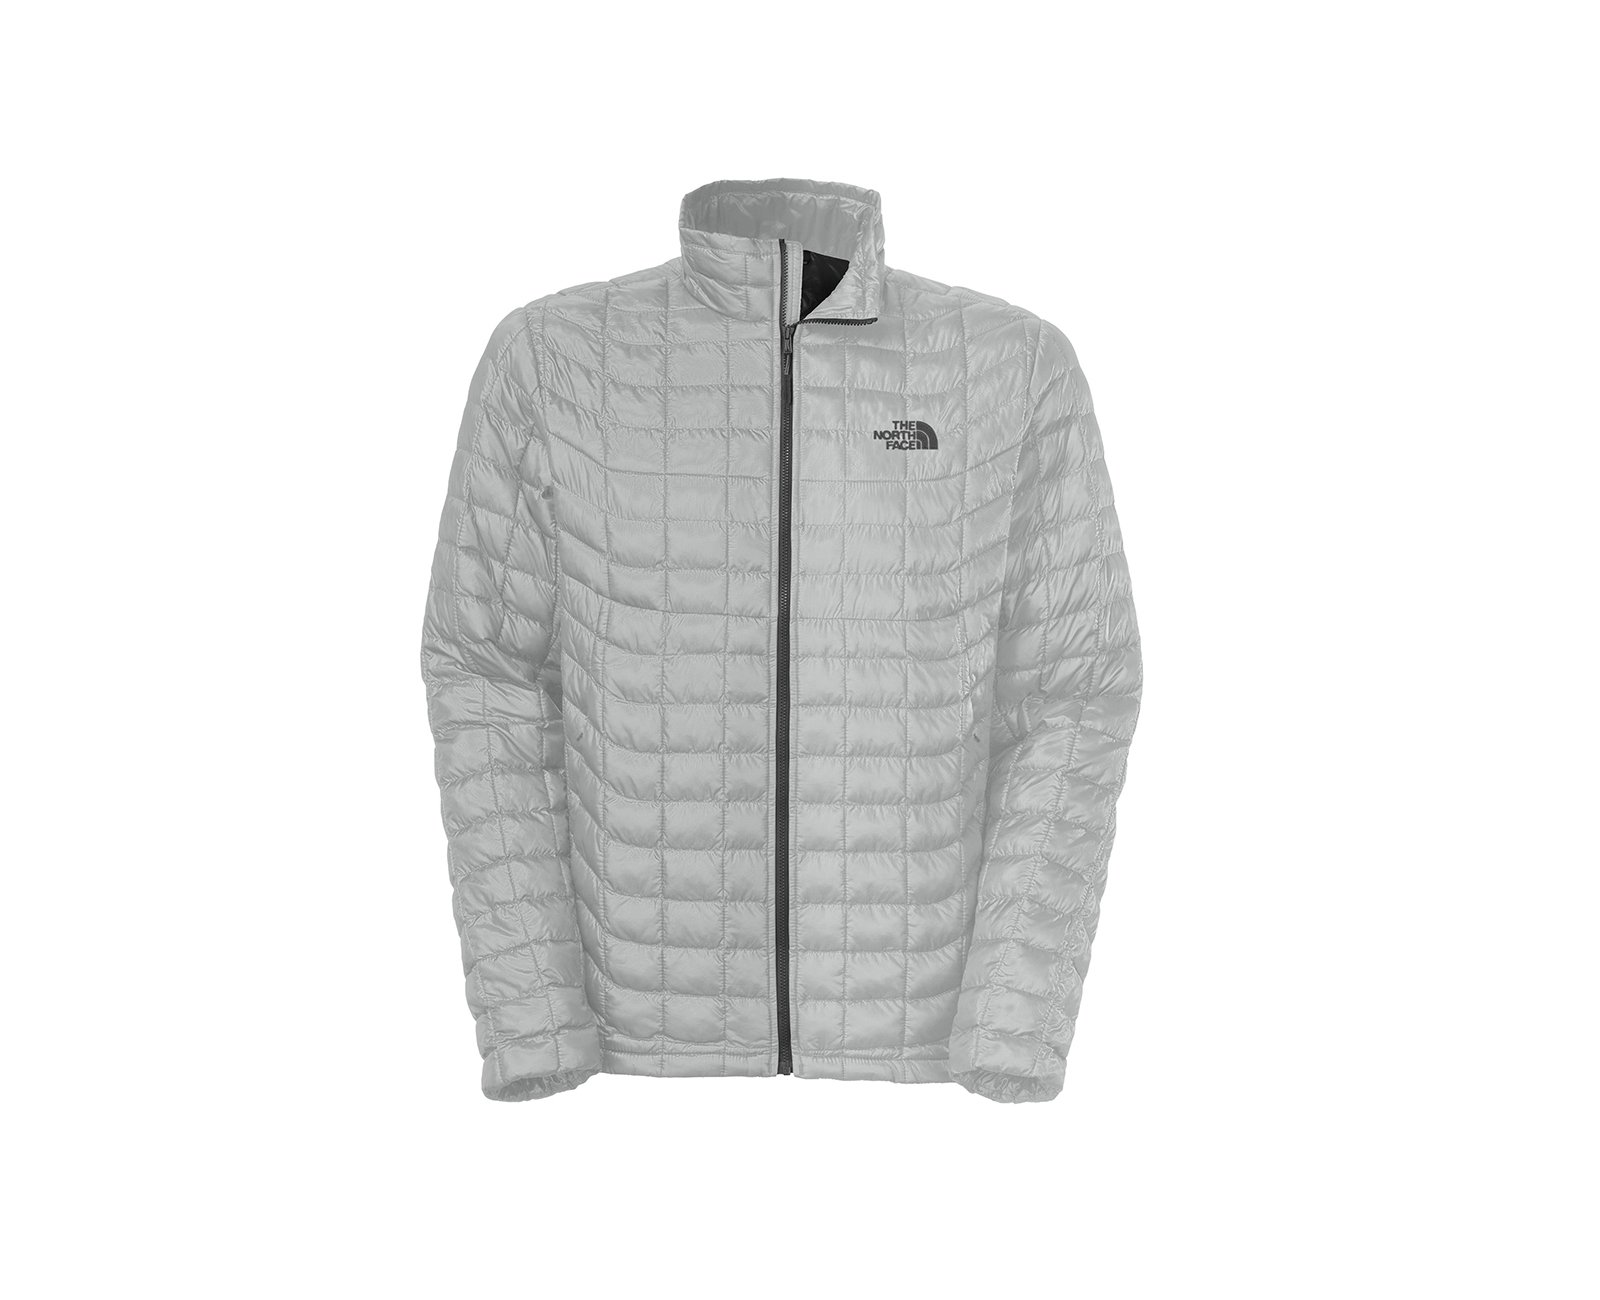 Jaqueta Thermoball Full Zip Masculina - Cinza  - The North Face - P